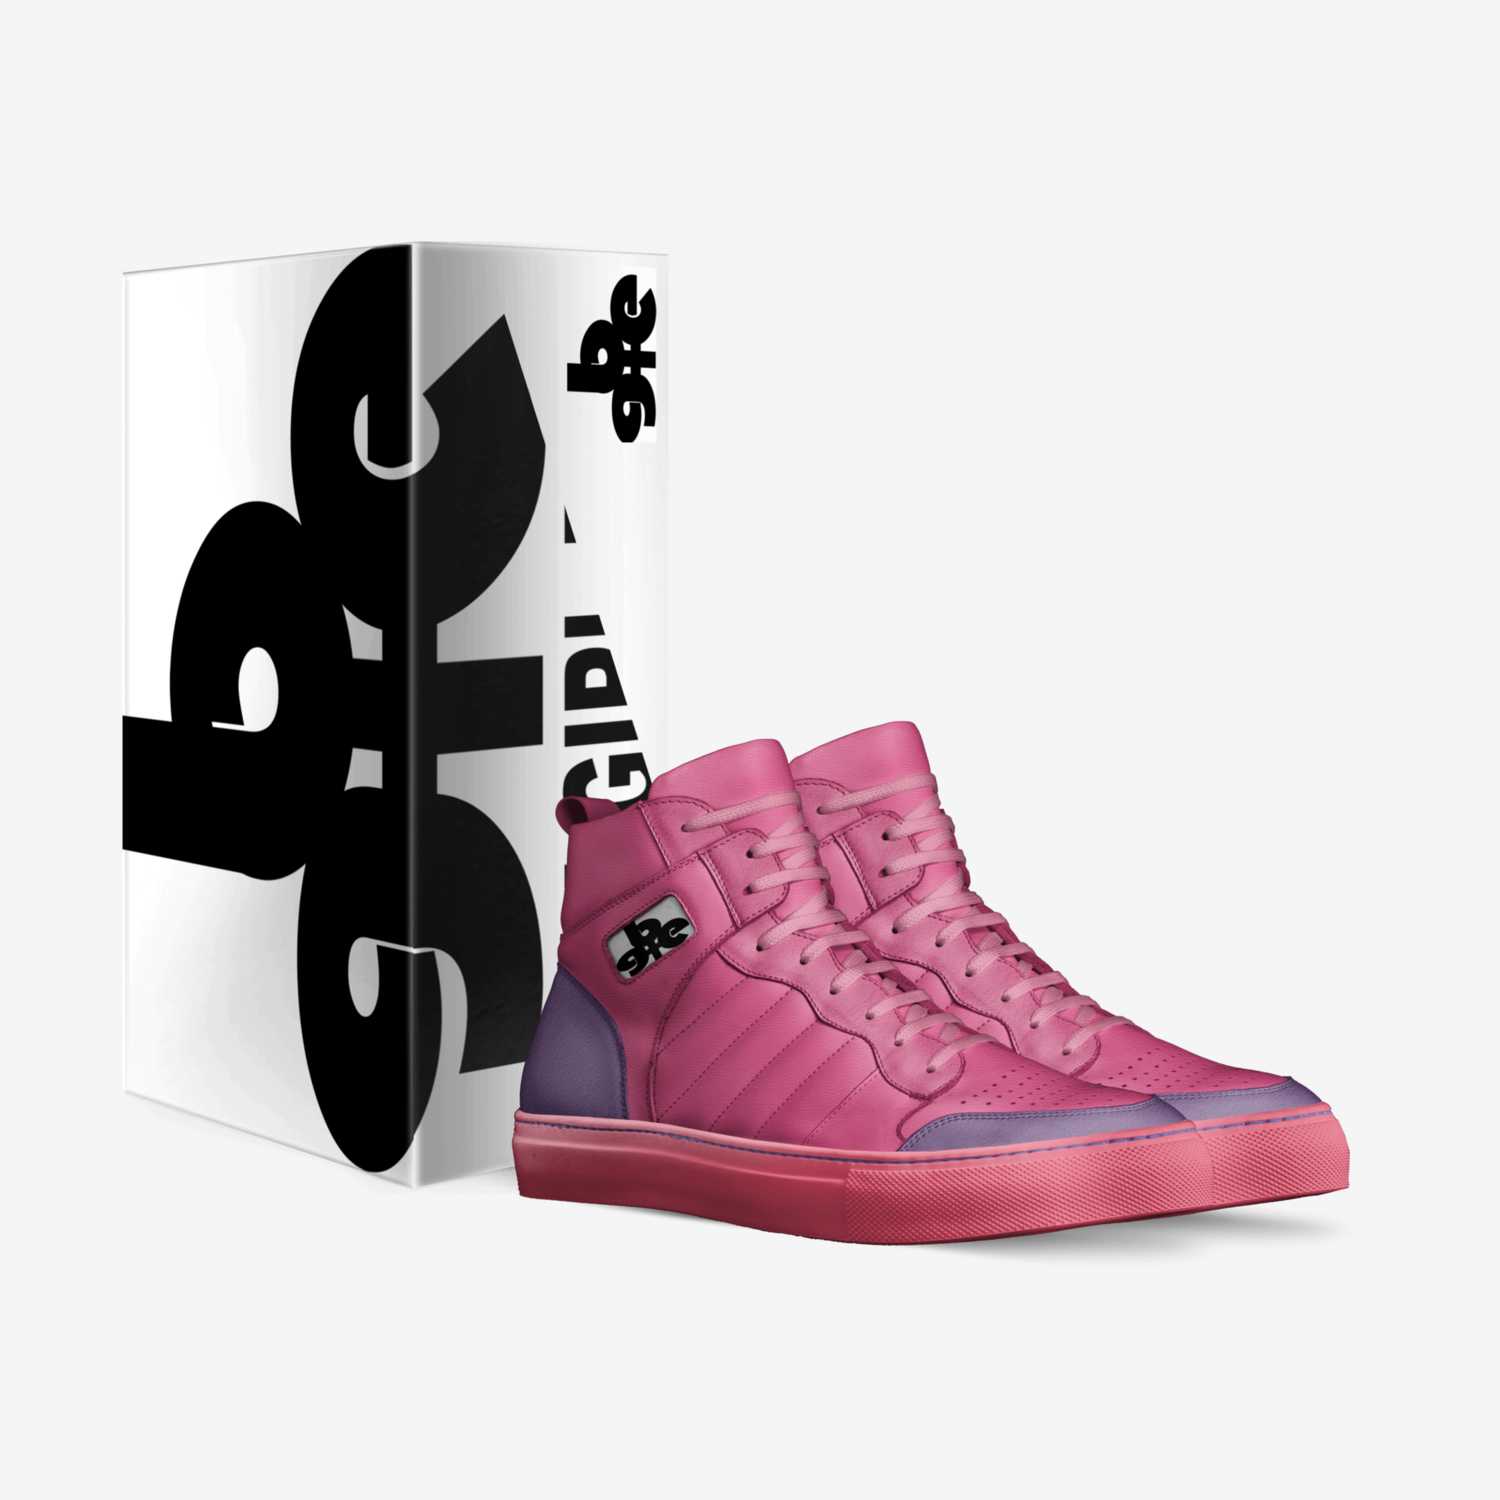 KB Pinky SJ1 custom made in Italy shoes by Baby-girl Elite | Box view